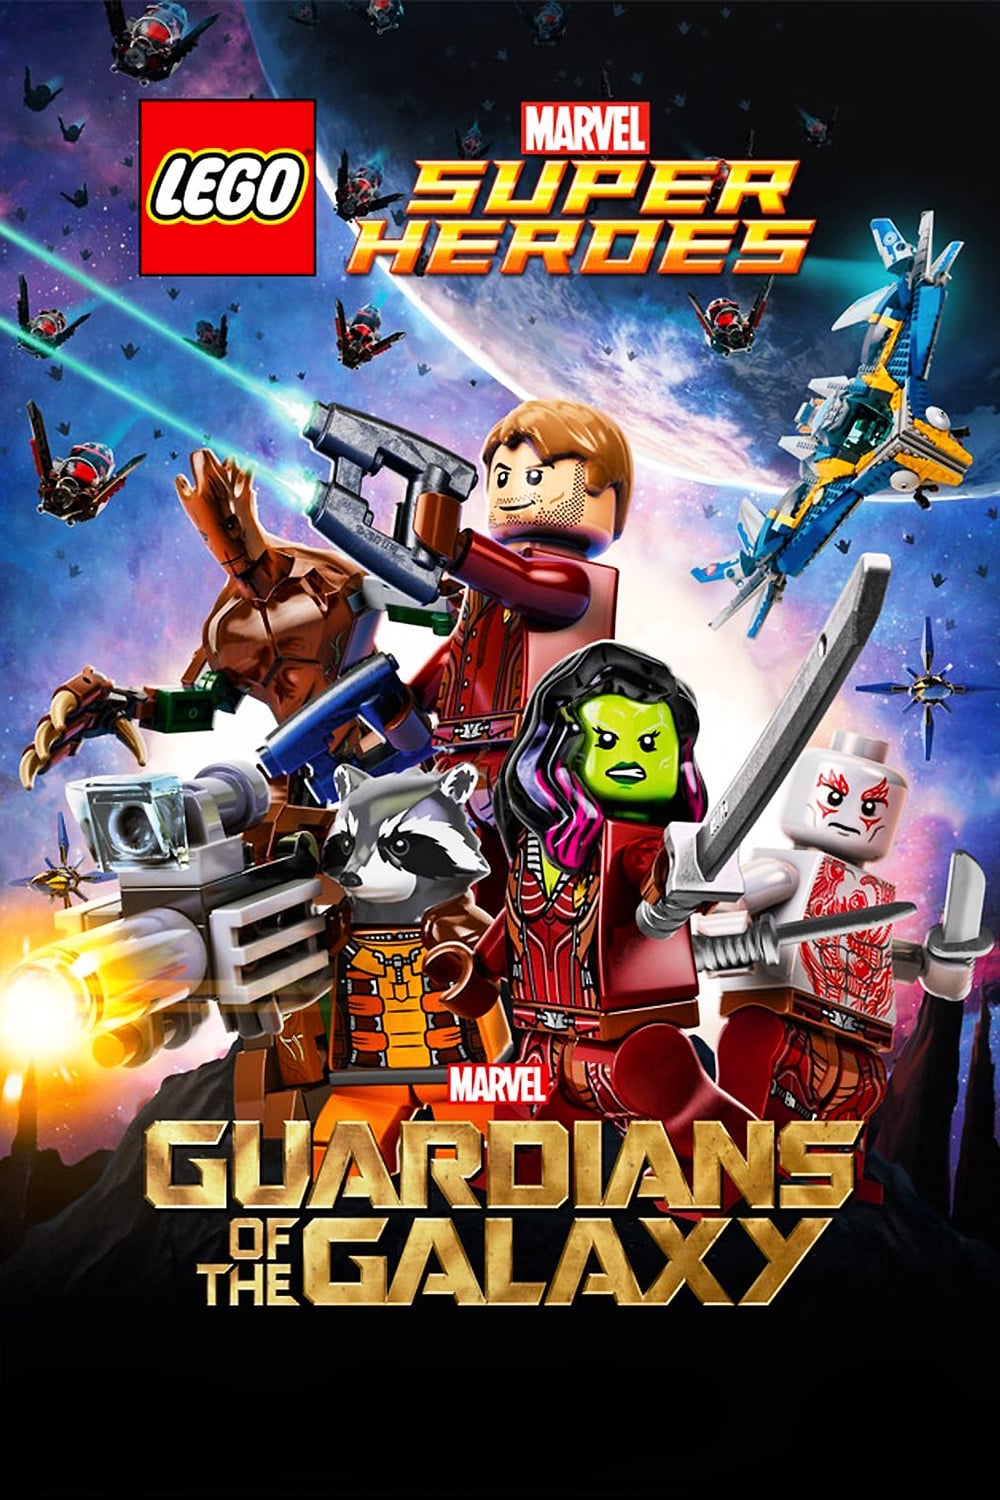 LEGO Marvel Super Heroes: Guardians of the Galaxy - Die Thanos Bedrohung (2017)